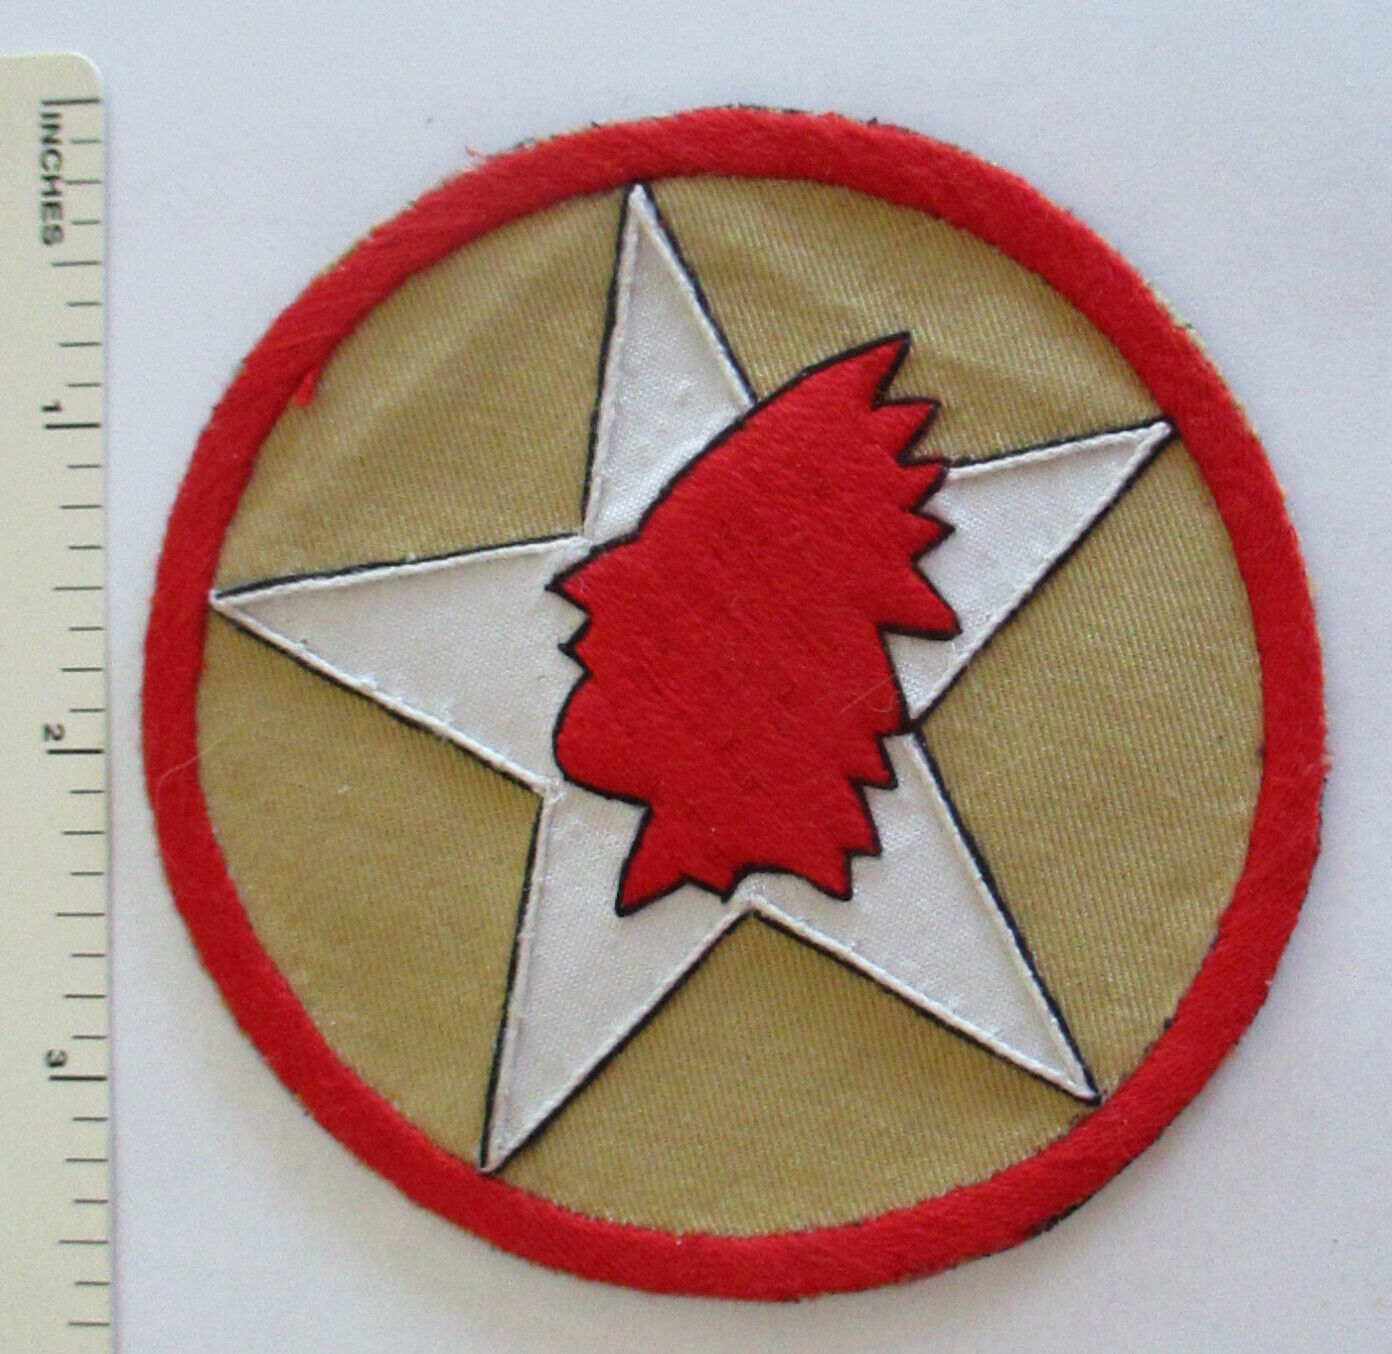 WW1 2nd INFANTRY DIVISION 23rd REGT 1st BTN US ARMY PATCH Veteran Display Repro